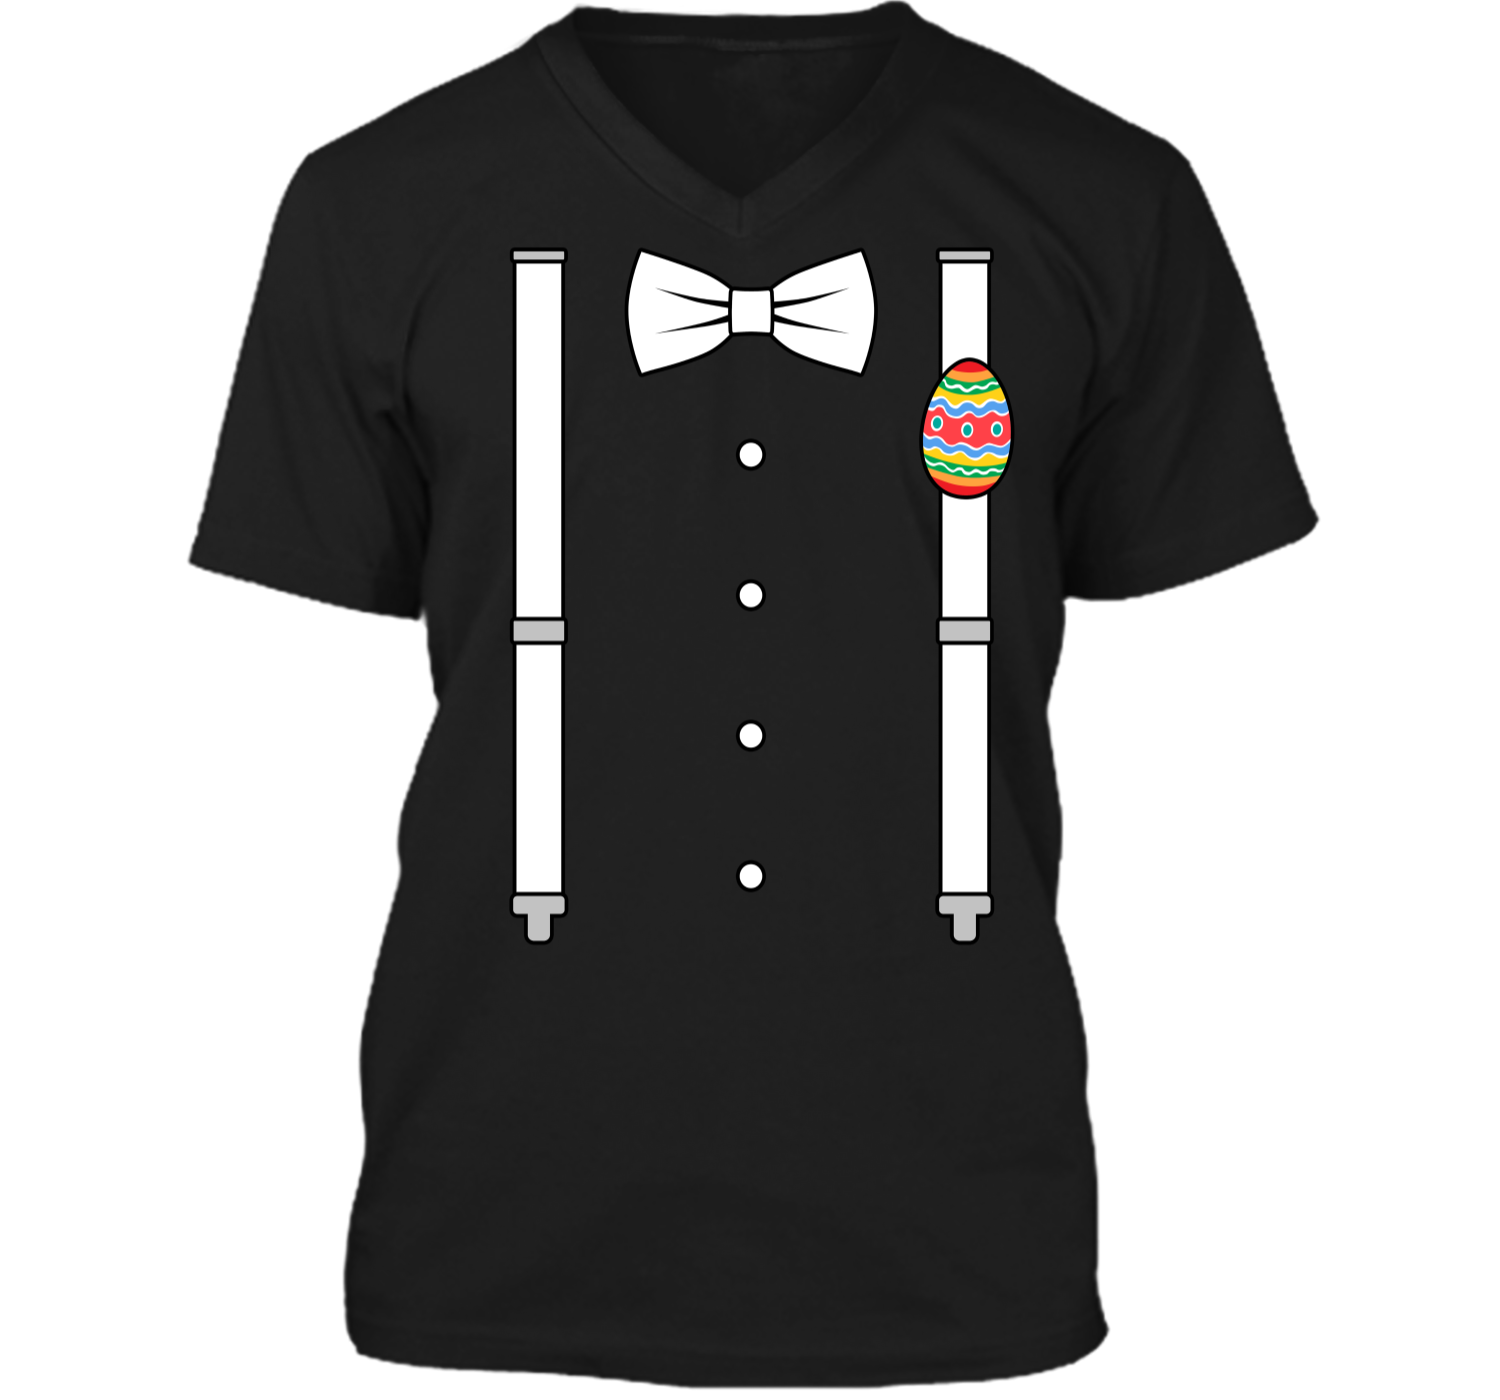 Black Shirt White Suspenders White Bow Tie - tbk red bow tie t shirt roblox